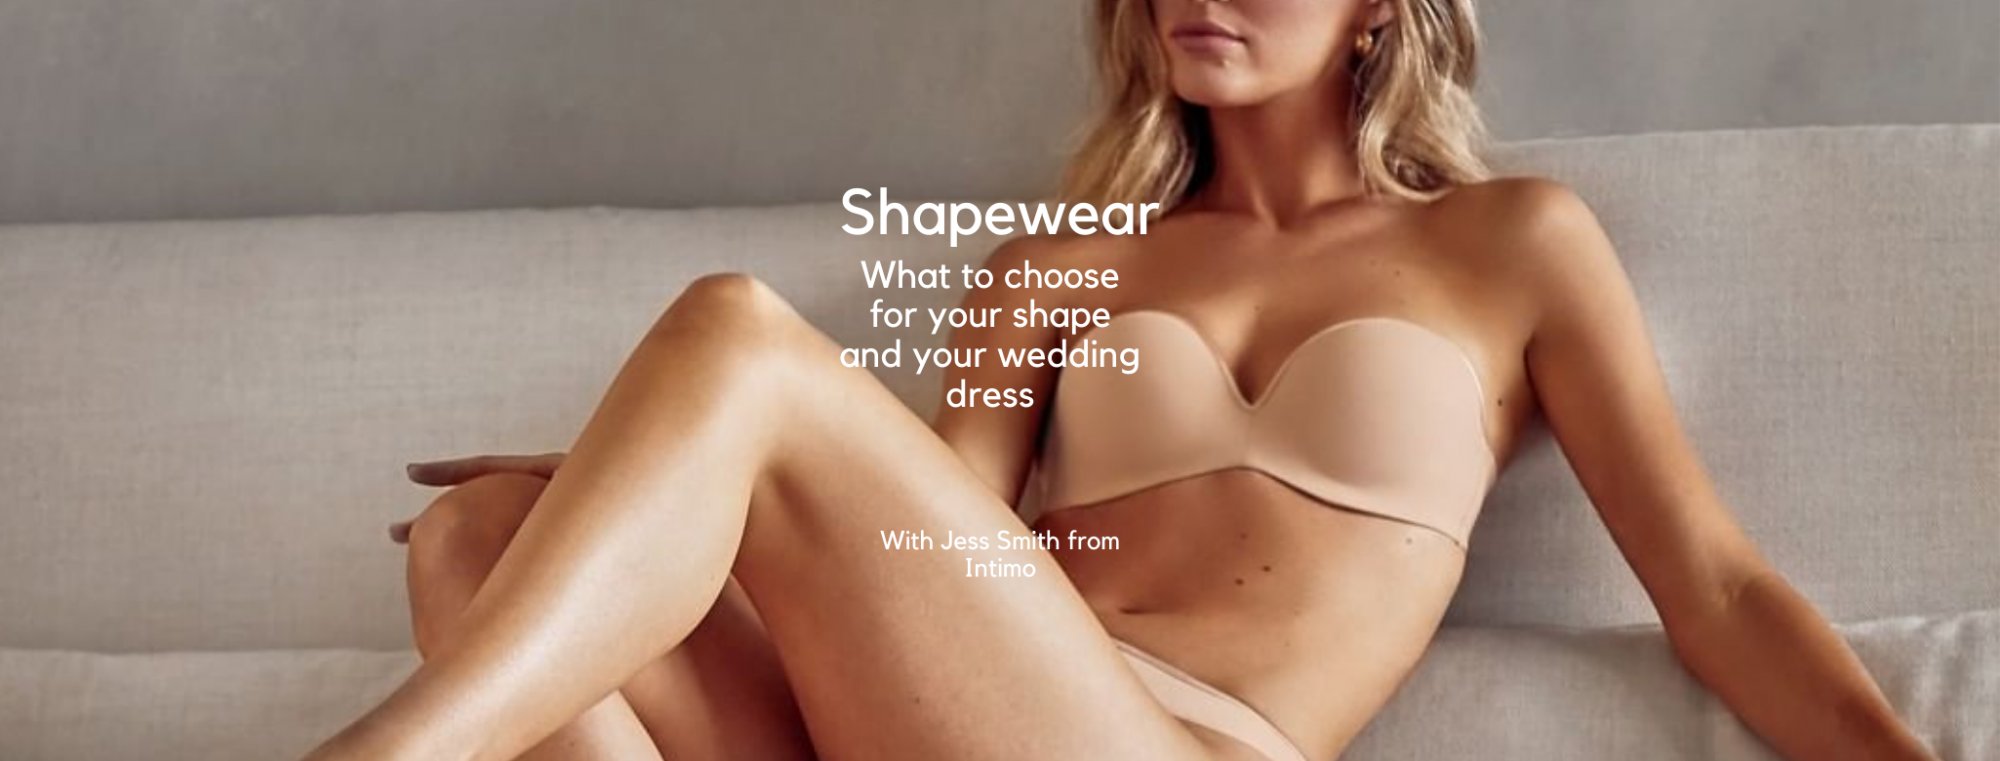 Bridal How To Choose Bridal Shapewear & Lingerie For Your wedding Day